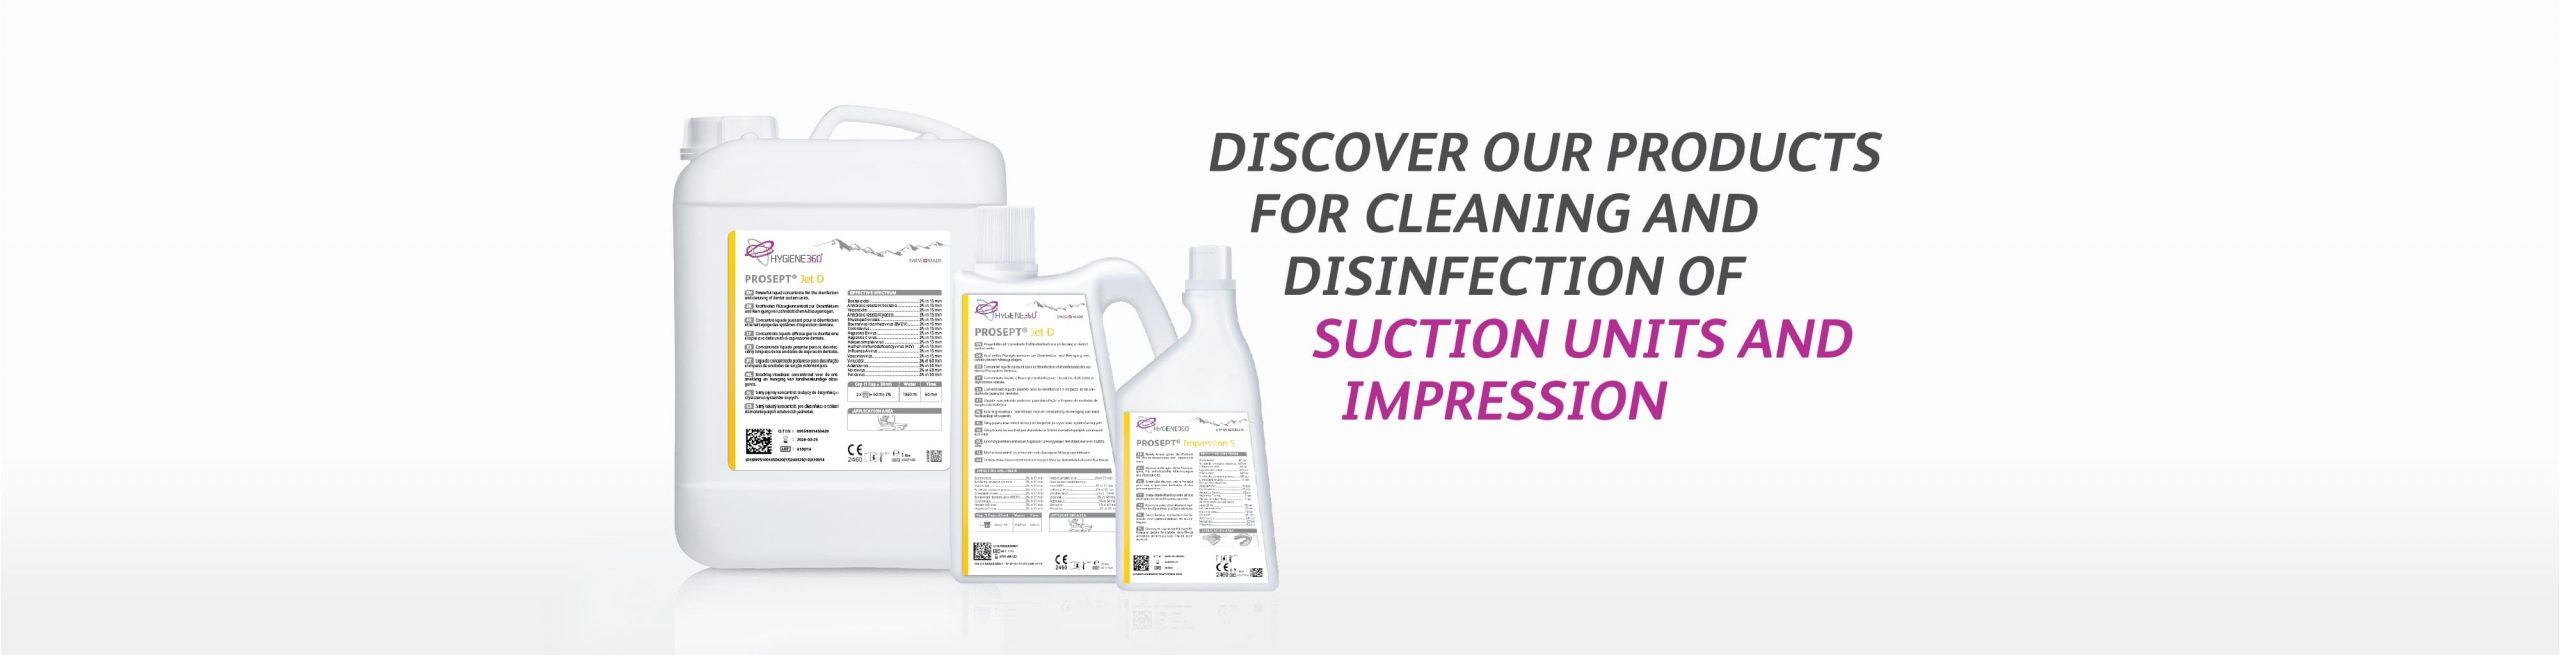 Suction Units, Impression Disinfectants and Cleaners